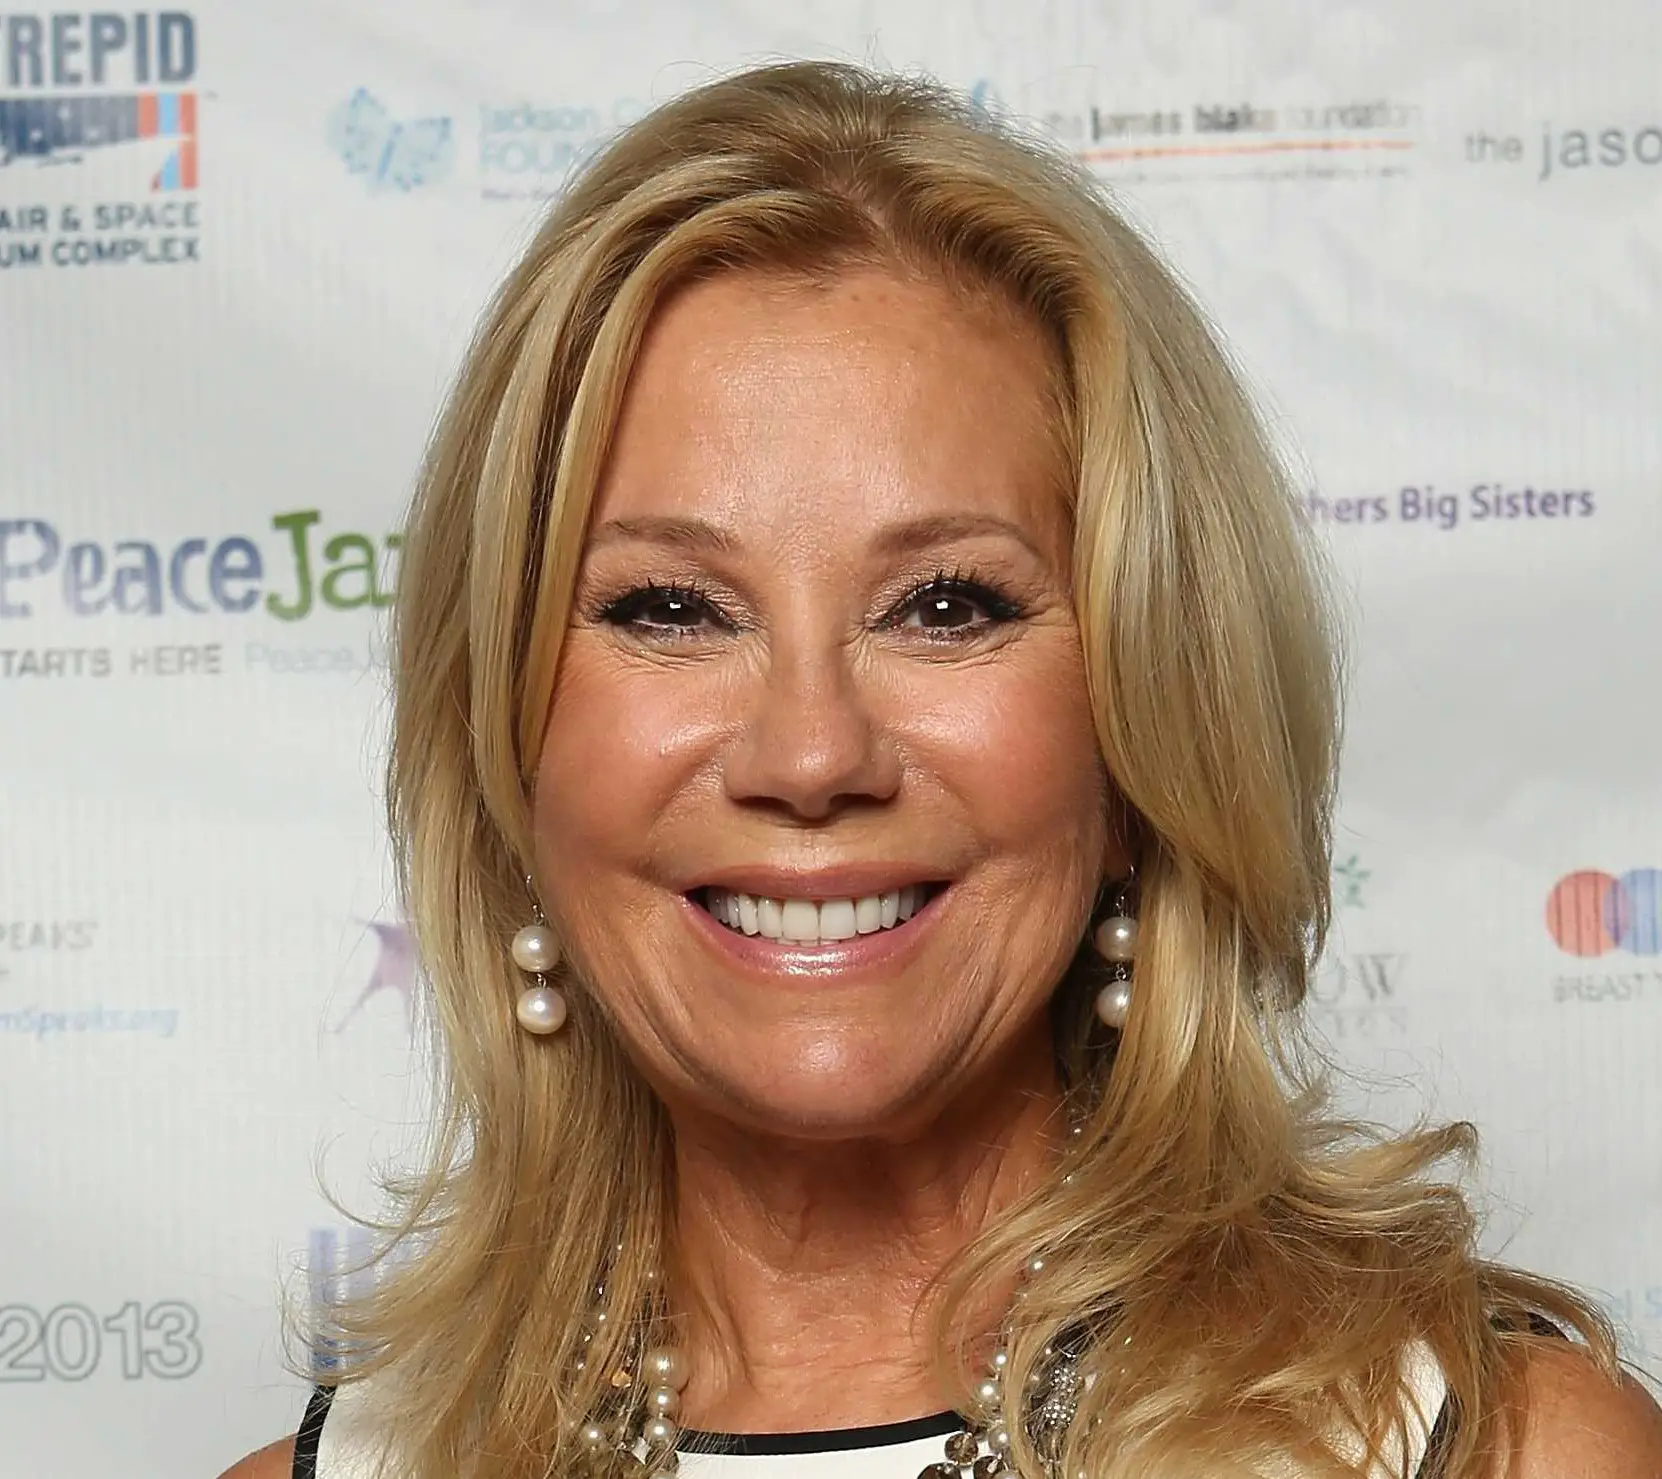 Kathie Lee Gifford Facelift Plastic Surgery Before and After Celebie.